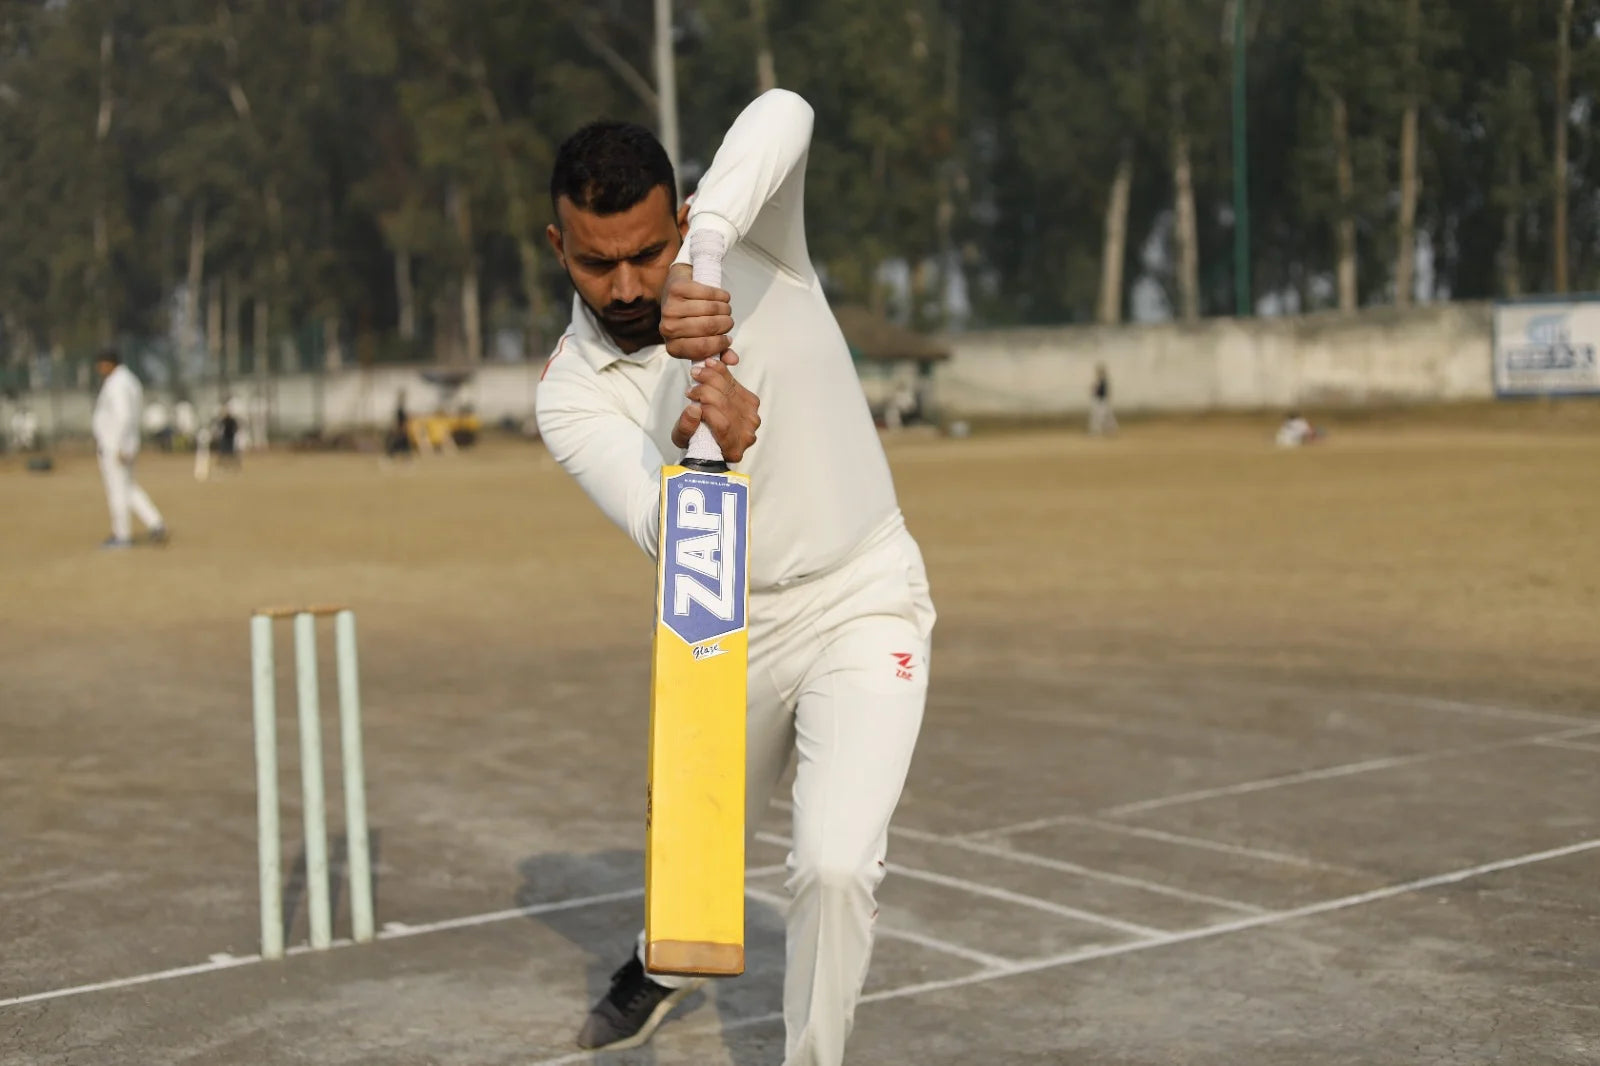 A player doing his shadow batting practice with the ZAP Glaze tennis cricket bat